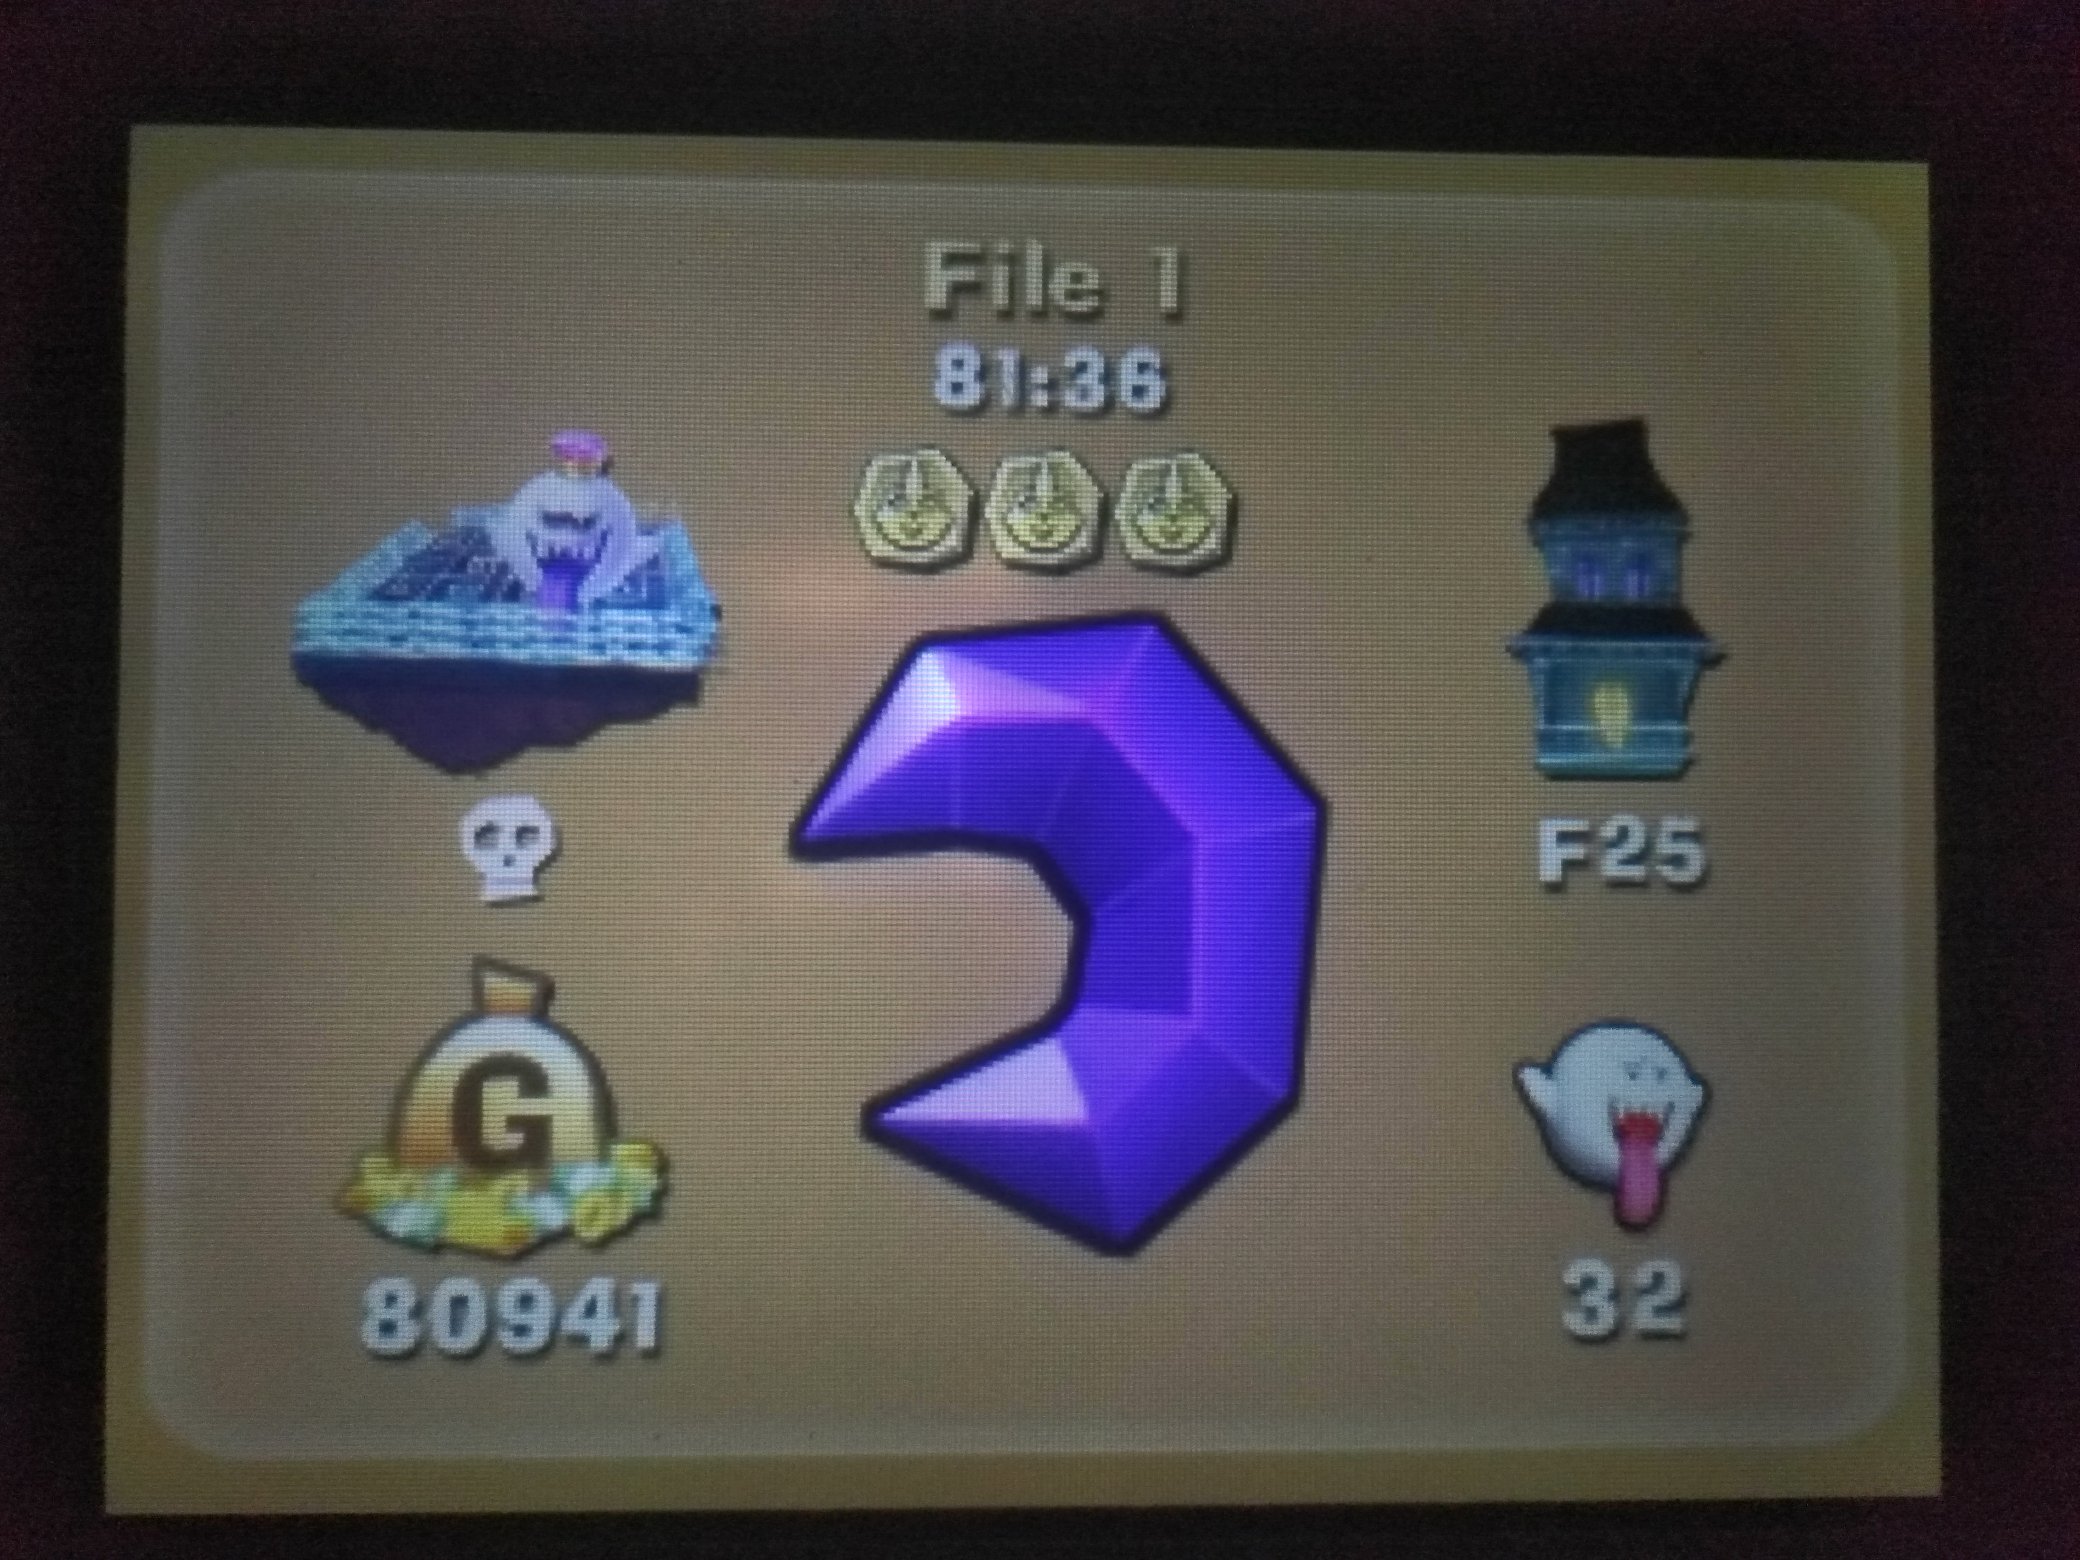 Sheriff Snezzy on X: I JUST 100% COMPLETED LUIGI'S MANSION 2!!!  #LuigisMansion2 #LuigisMansionDarkMoon #3DS  / X